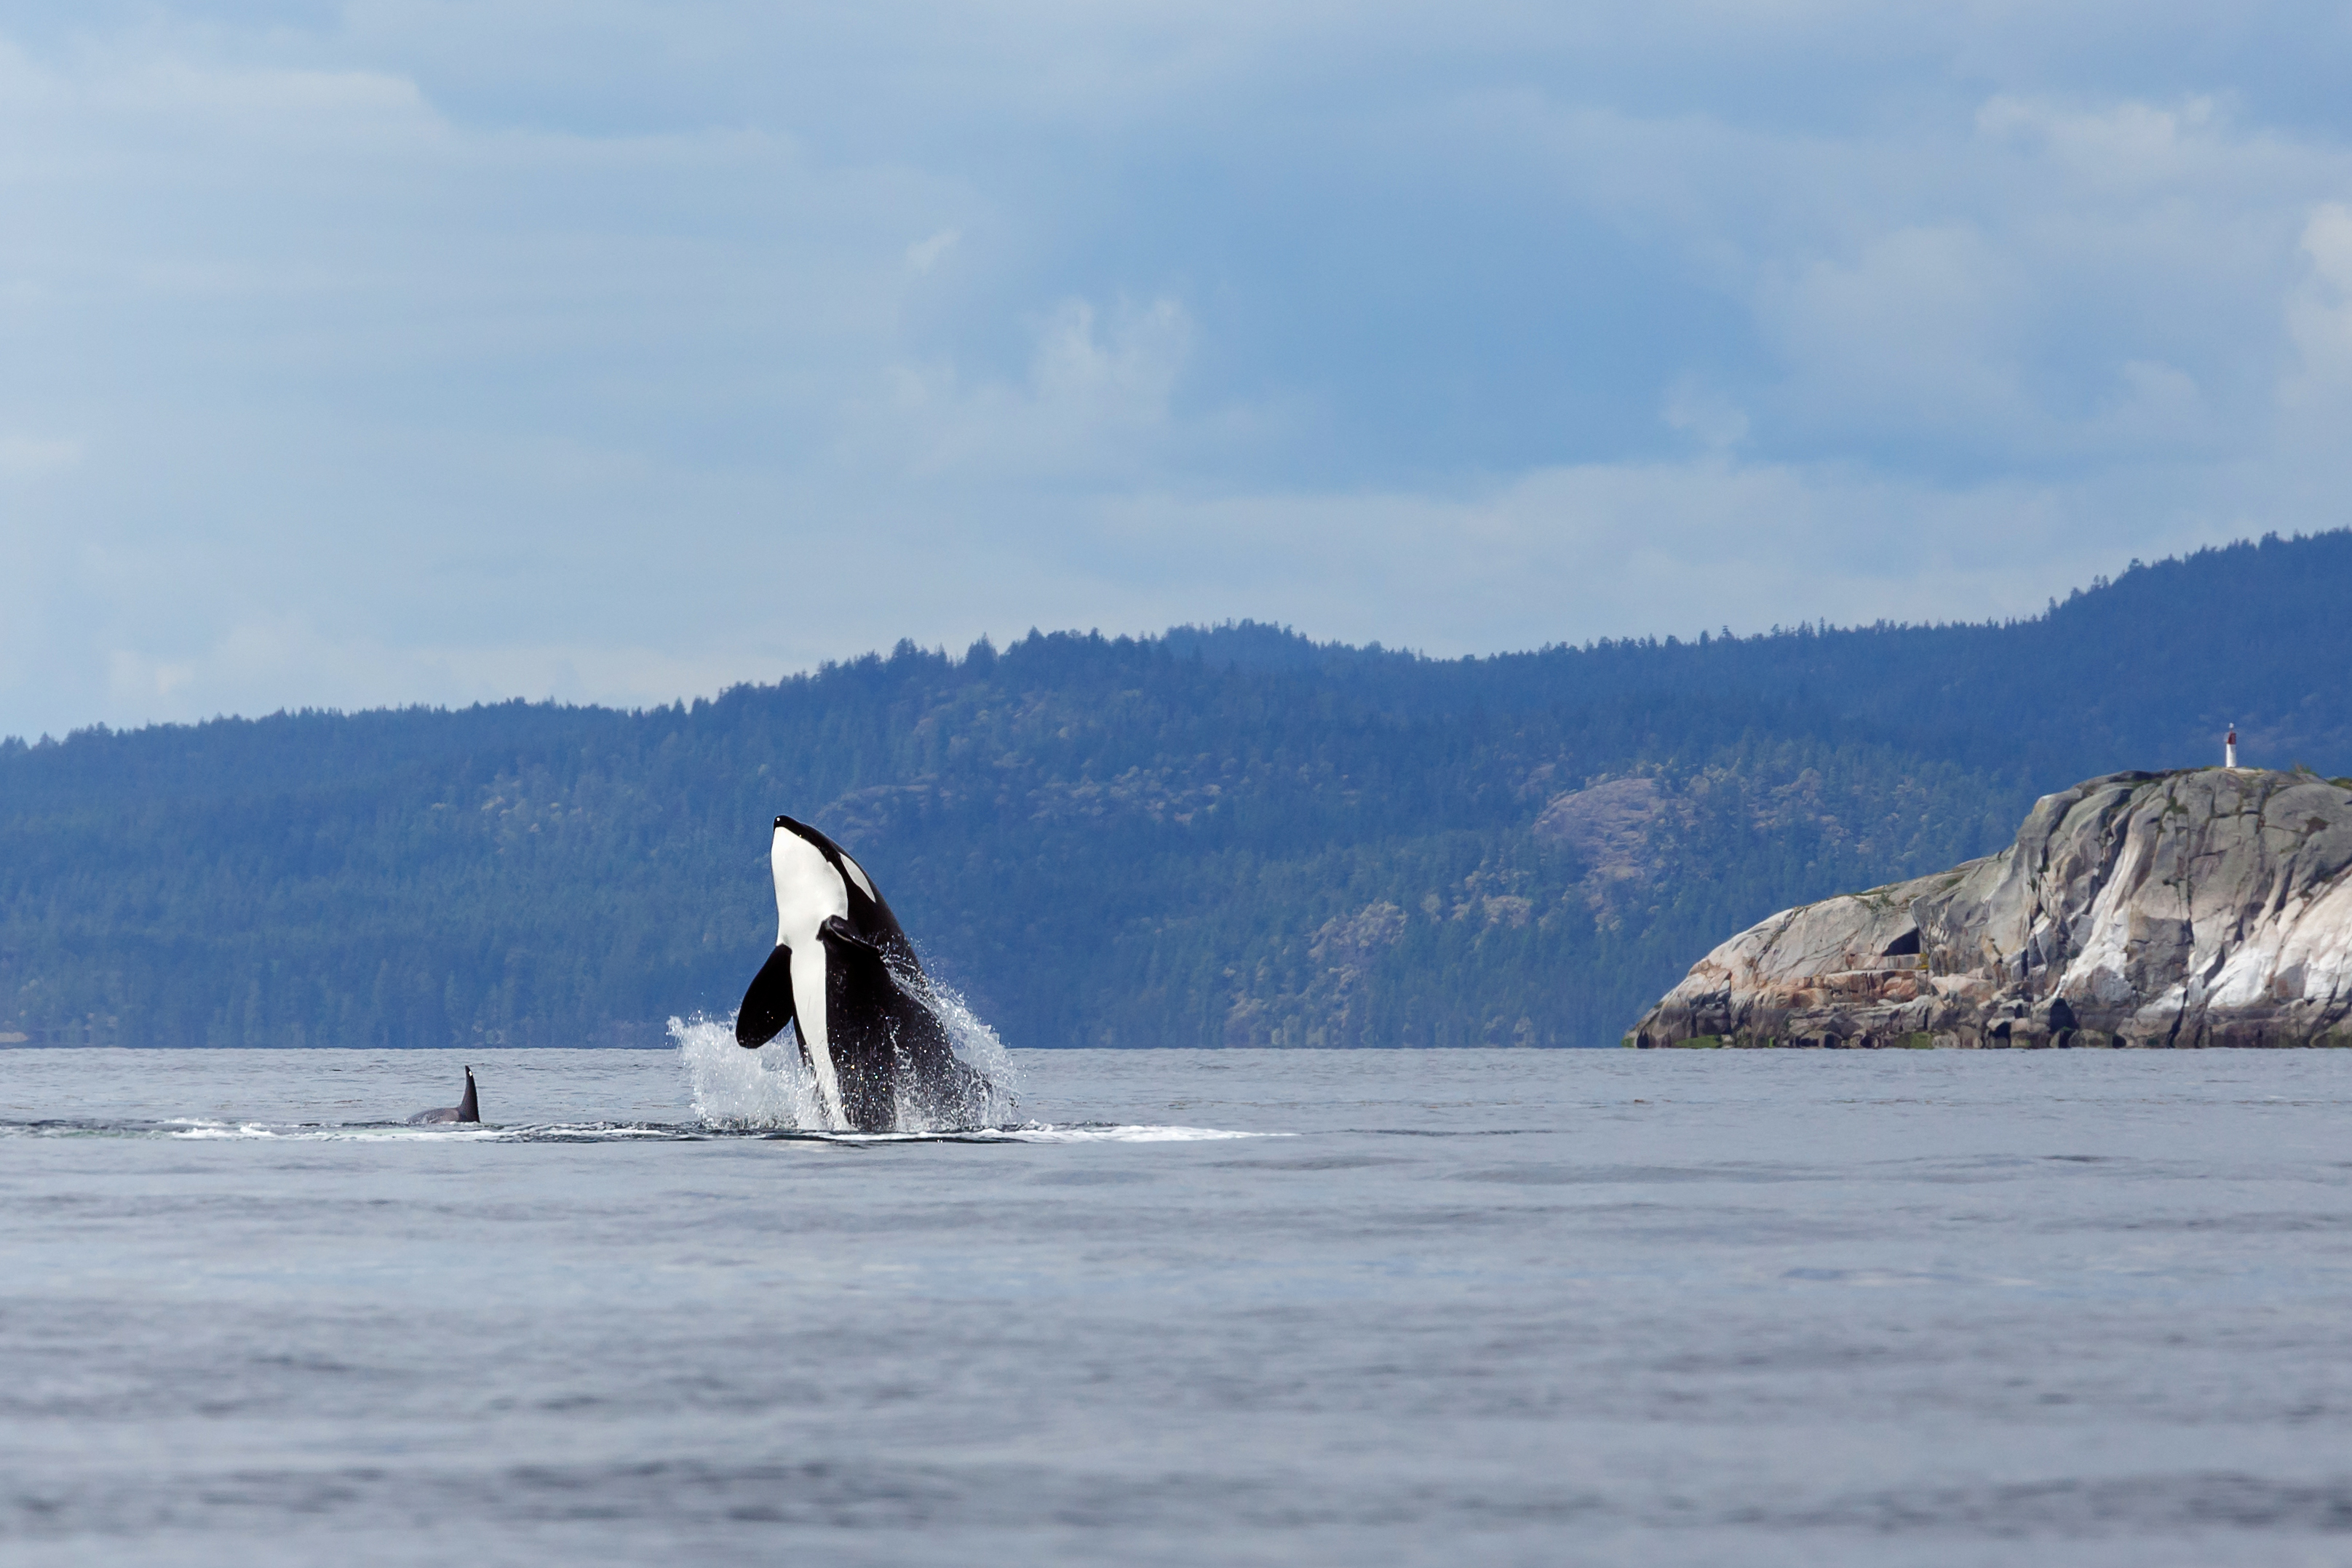 An Orca jumps out of the water.